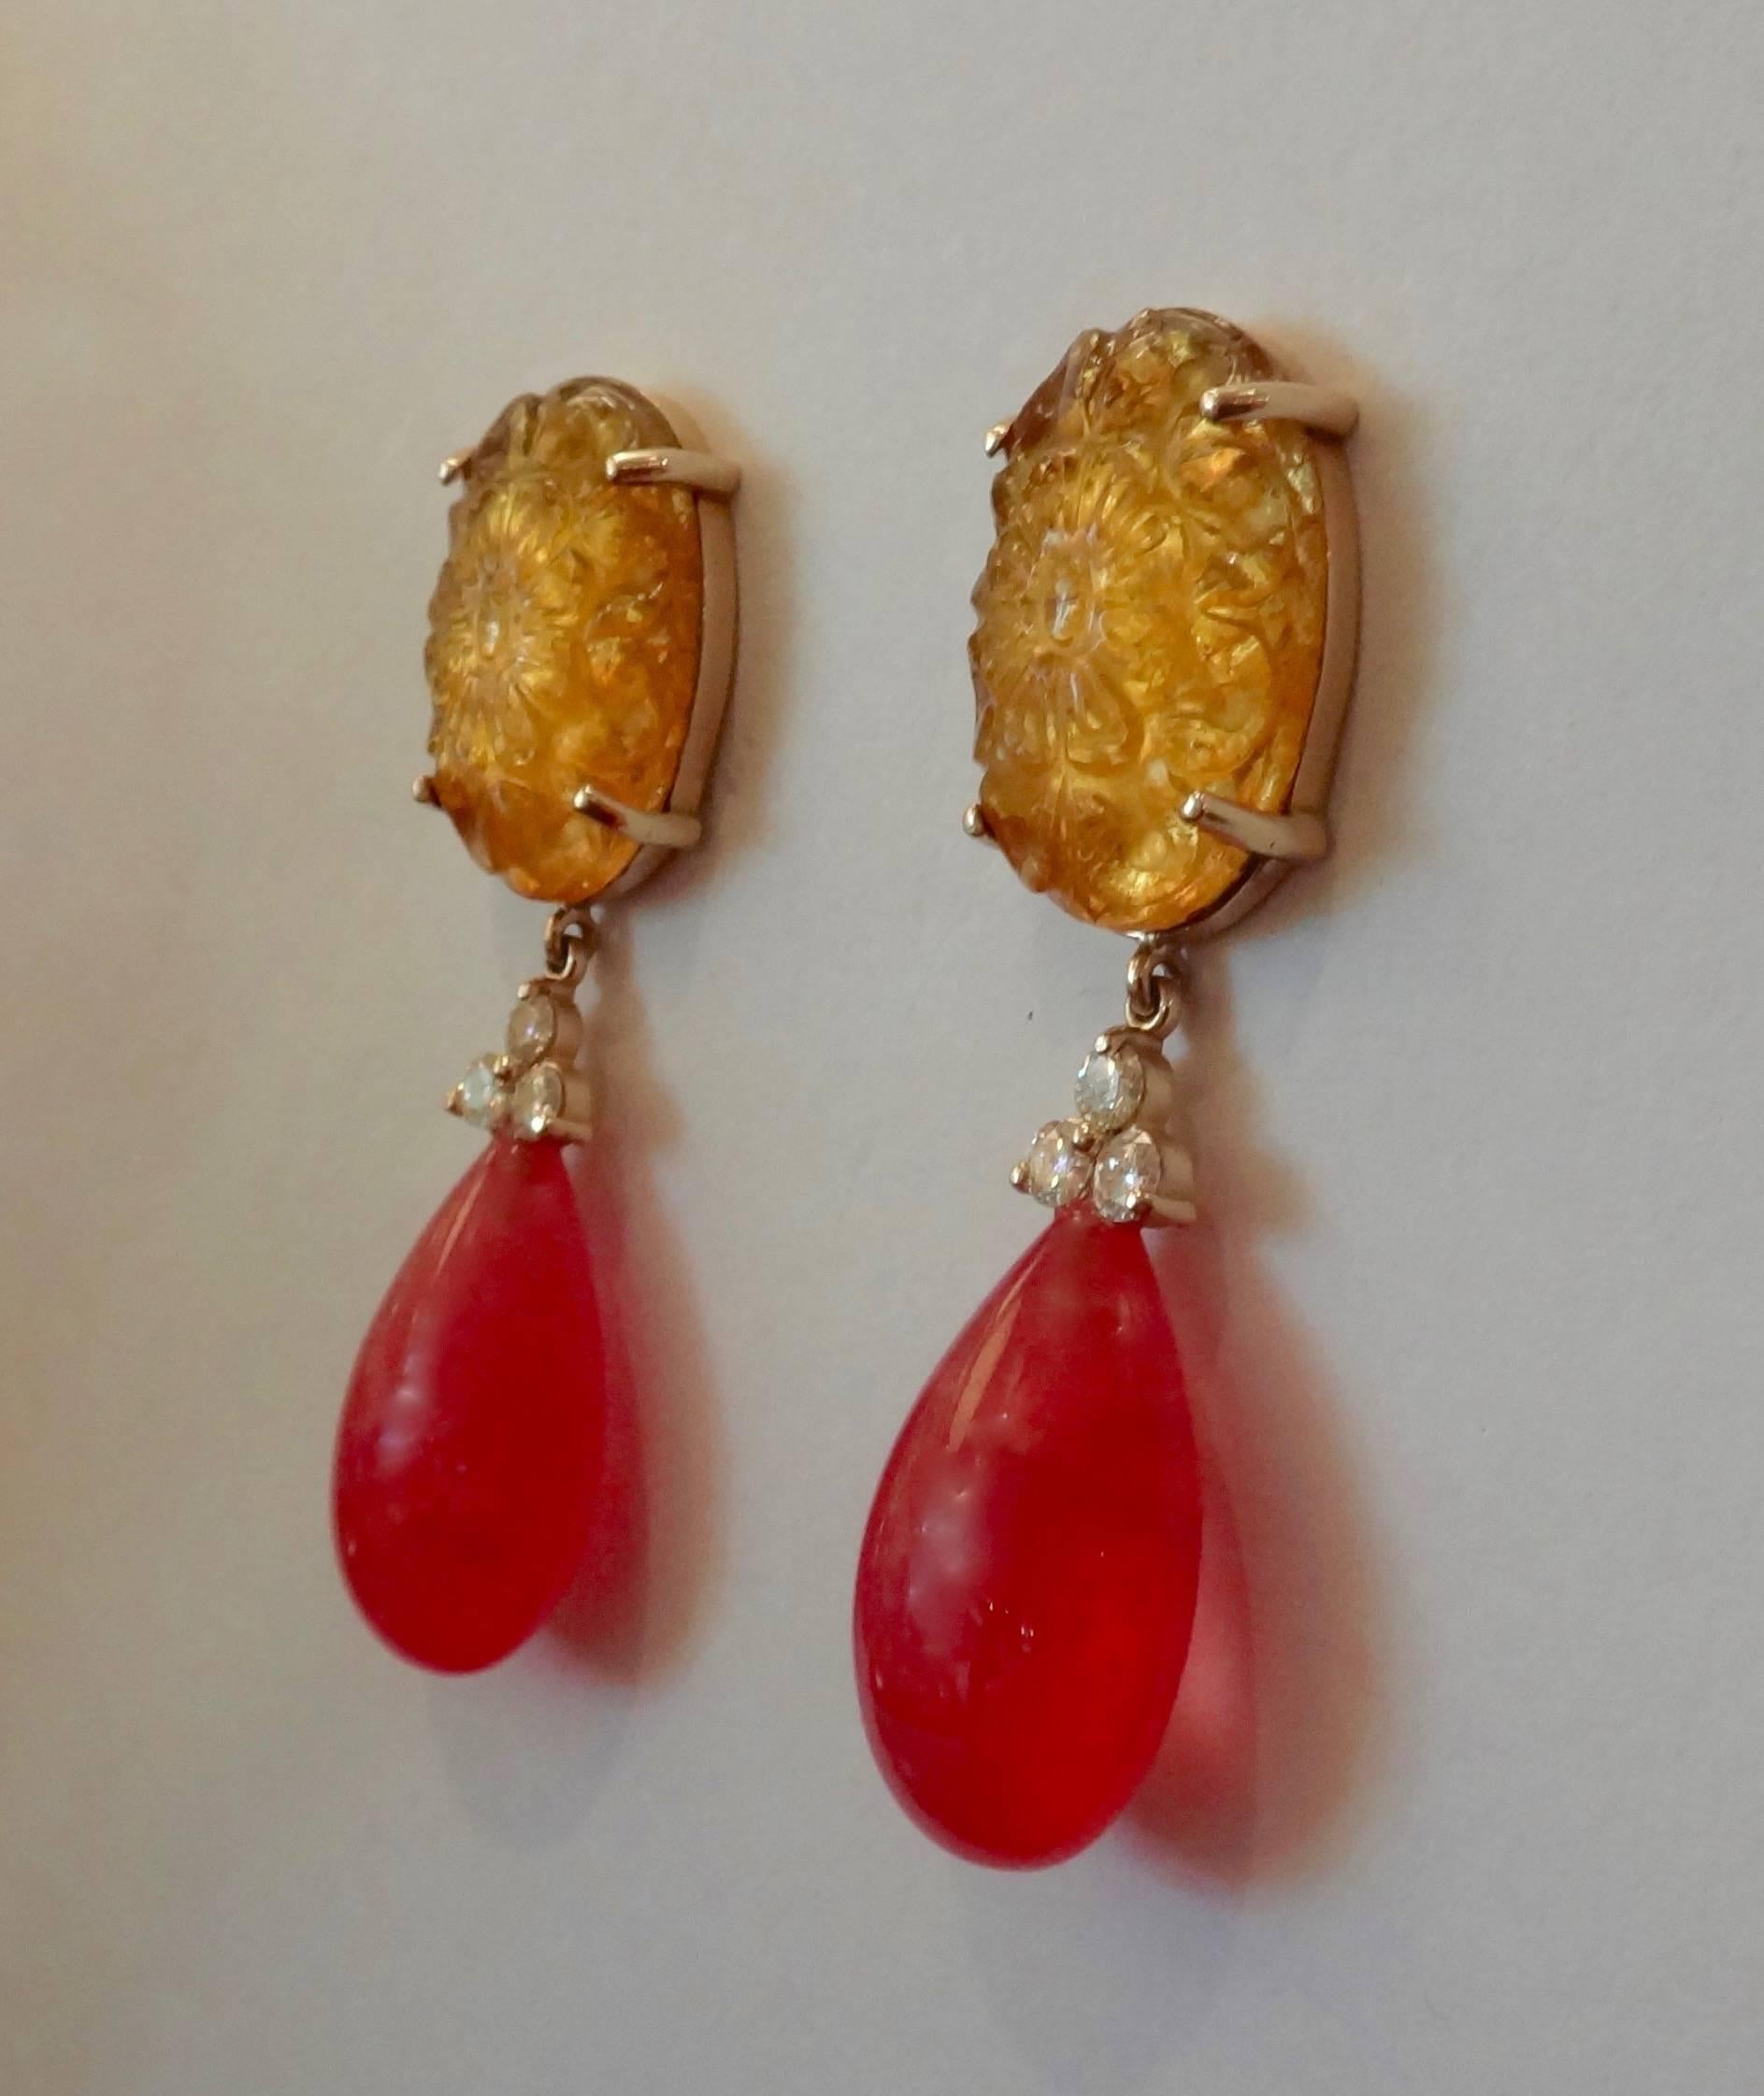 Carved citrines are paired with rare and gem quality rhodochrosite pendants (2 at 49.78 carats). Further decorating the earrings are 6 diamonds at .60 carats.  Post with extra large friction backs.  